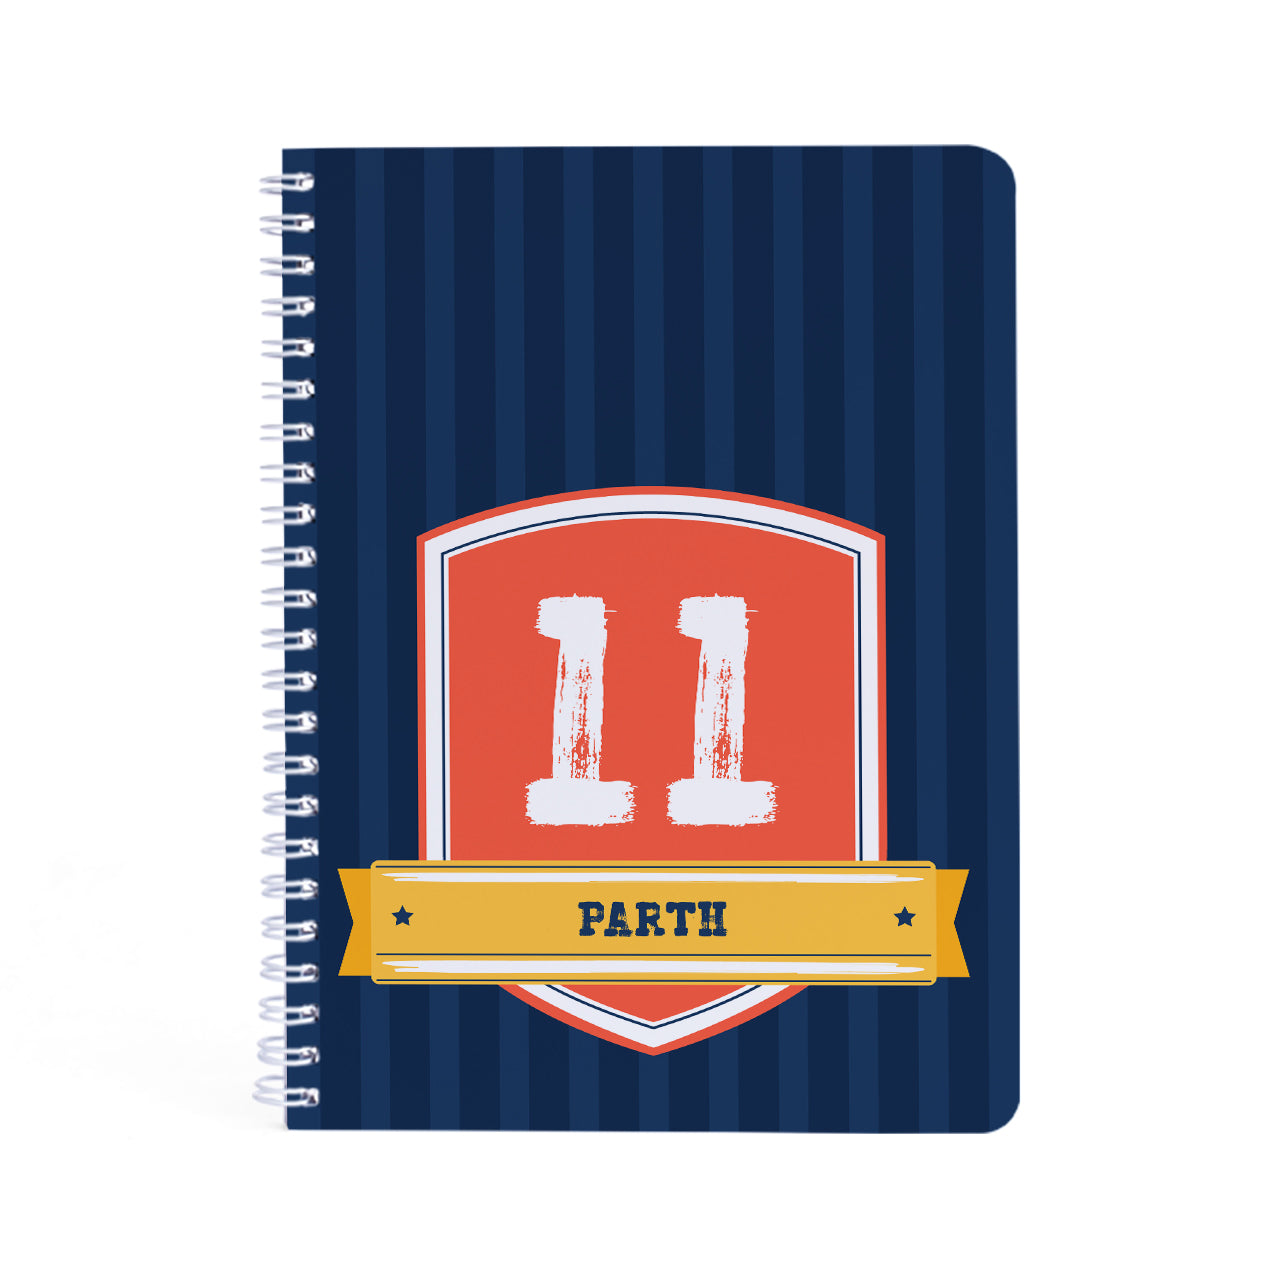 Personalised Spiral Notebook - Jersey Number